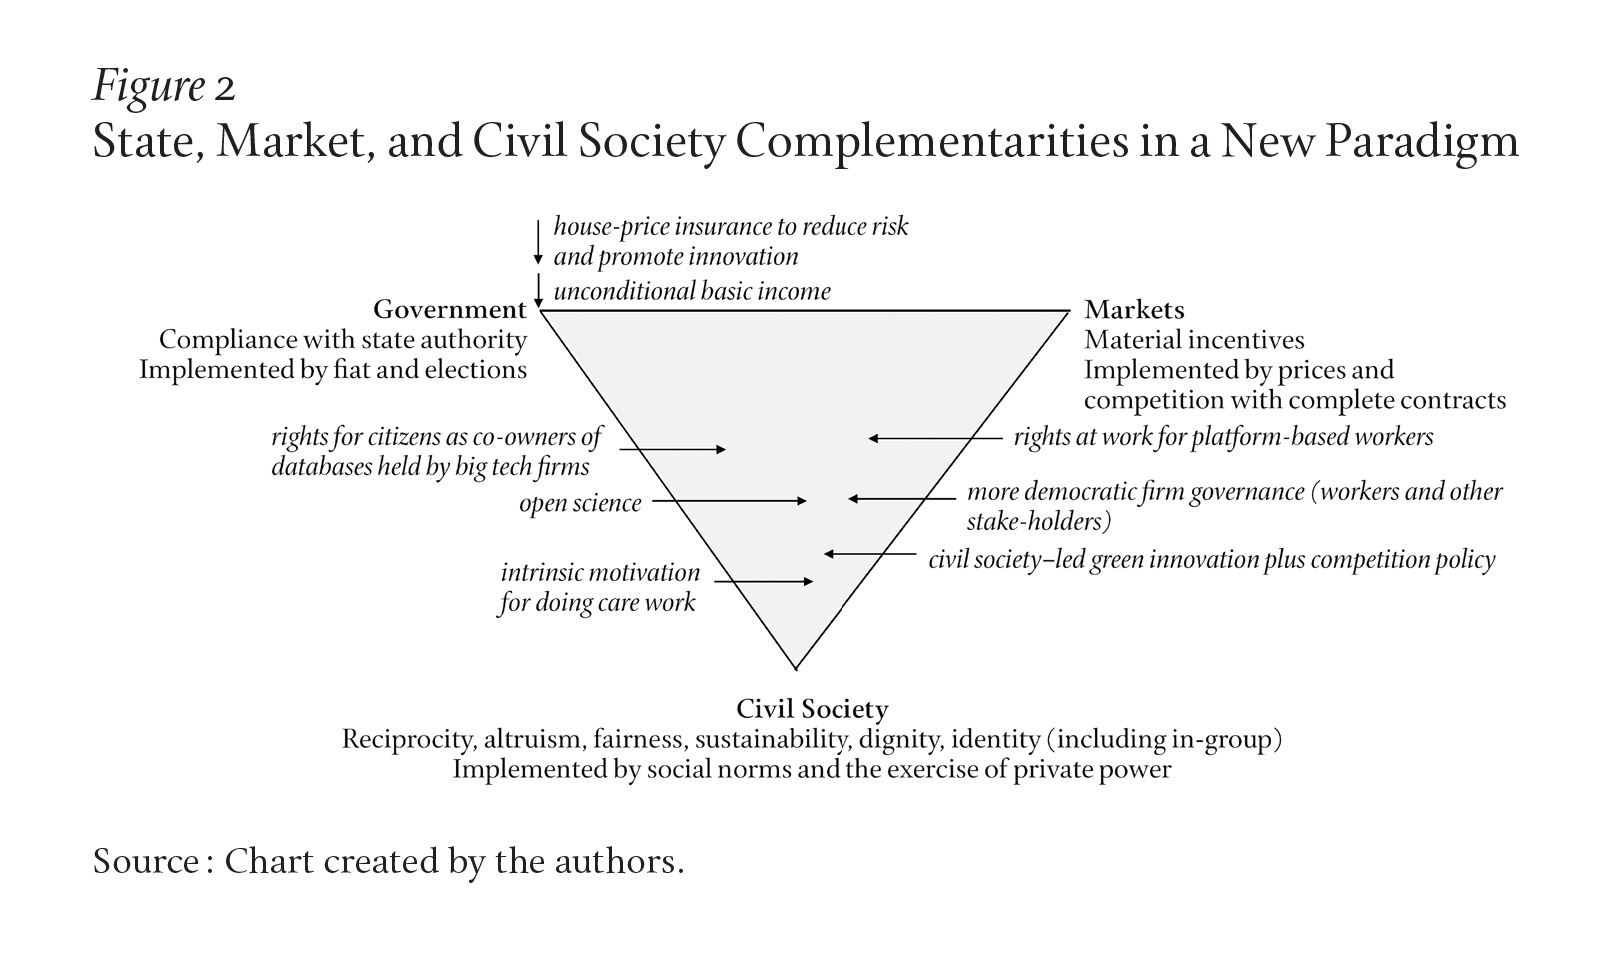 A triangular graph situates the dynamics between three poles. The poles are Government (Compliance with state regulations), Markets (Material incentives), and Civil Society (Reciprocity, altruism, fairness, sustainability, dignity, identity [including in-group]). Among their related institutions & policies are “house-price insurance to reduce risk & promote innovation, unconditional basic income,” “rights for citizens as co-owners of databases held by big tech firms,” & “civil society–led green innovation."